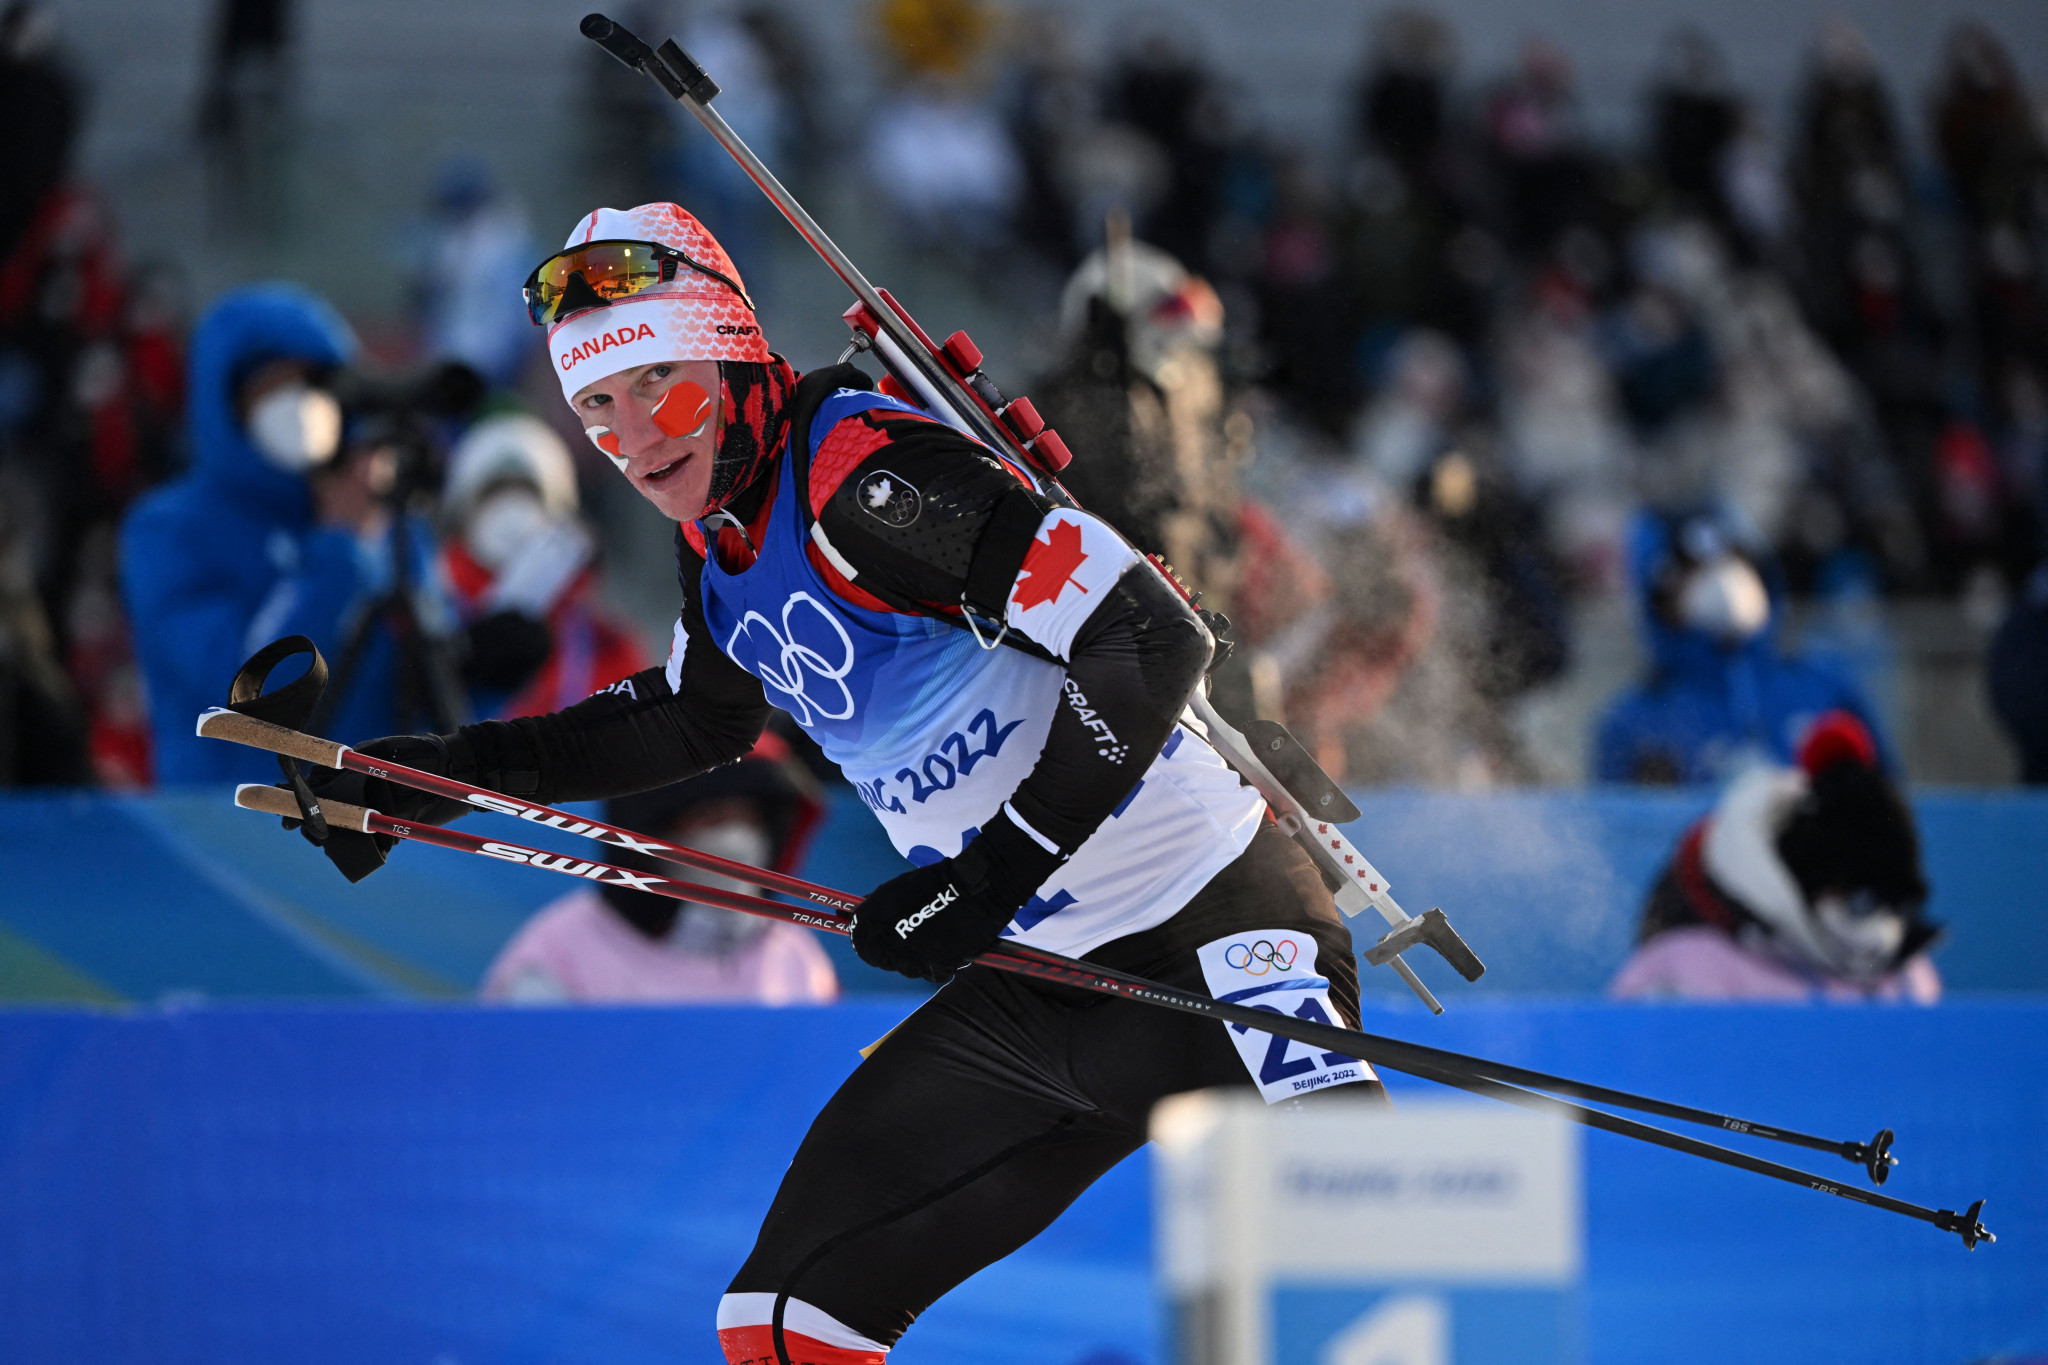 Scott Gow's fifth place finish in the men's 20 kilometres race was the highest achieved in by a Canadian in the Beijing 2022 biathlon competitions ©Getty Images